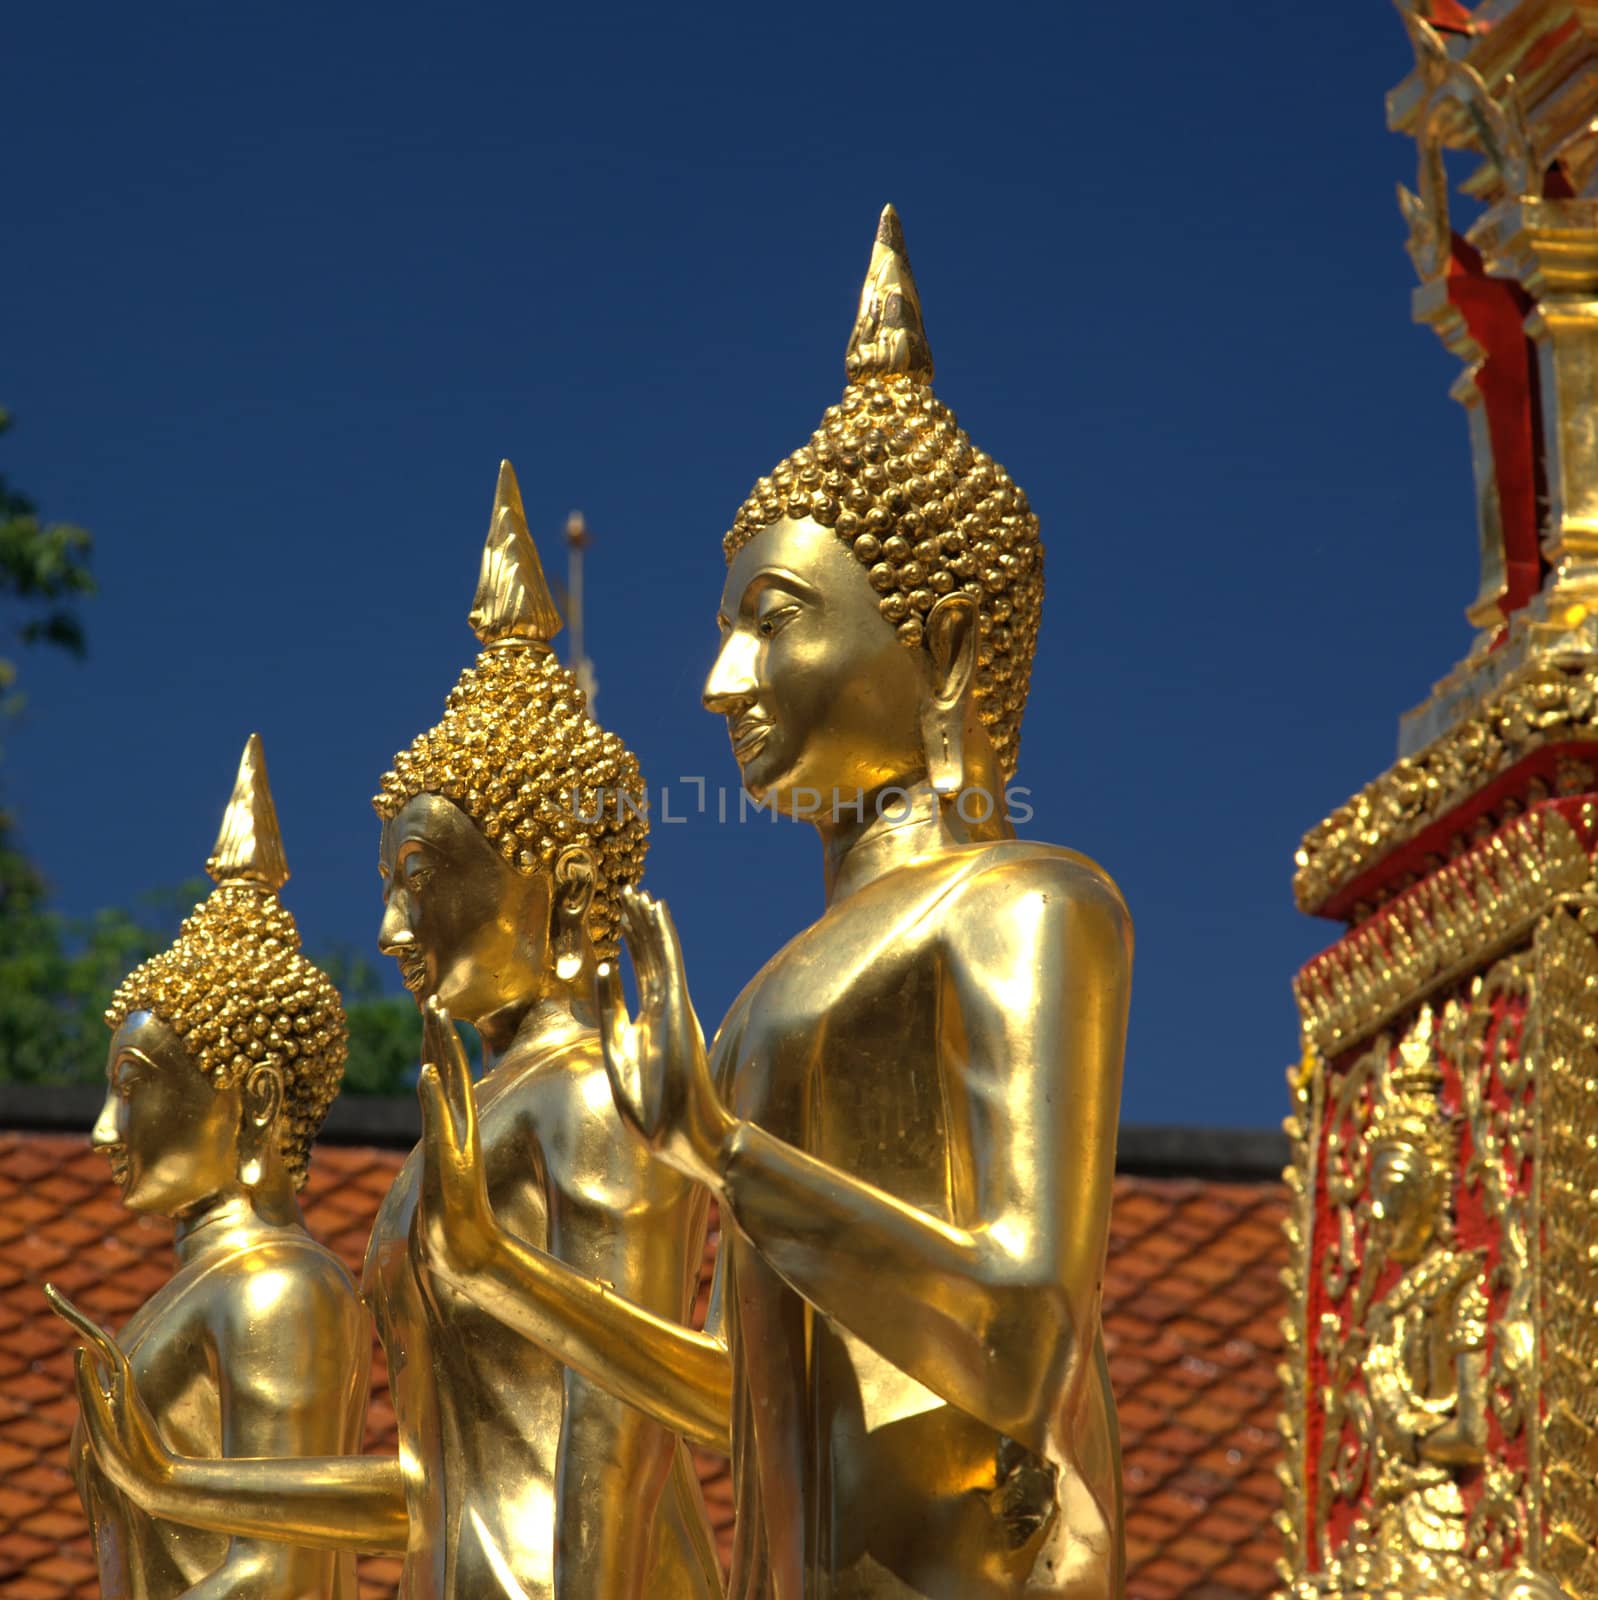 Three Golden Buddhas in a row against a blue sky - square